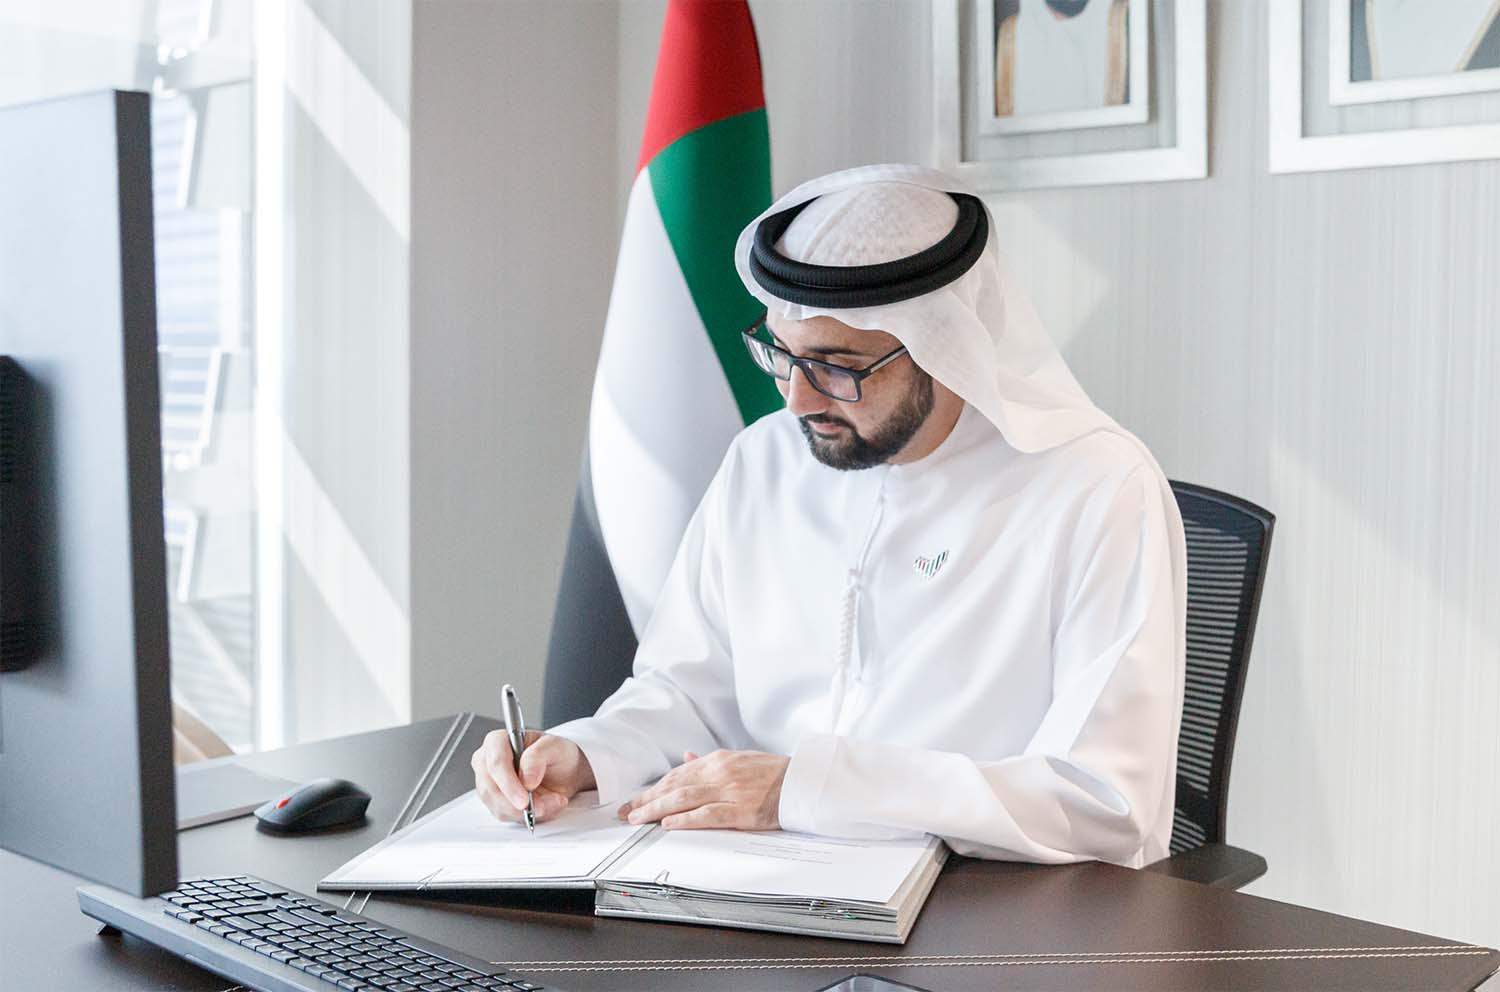 The UAE is strengthening trade with Israel